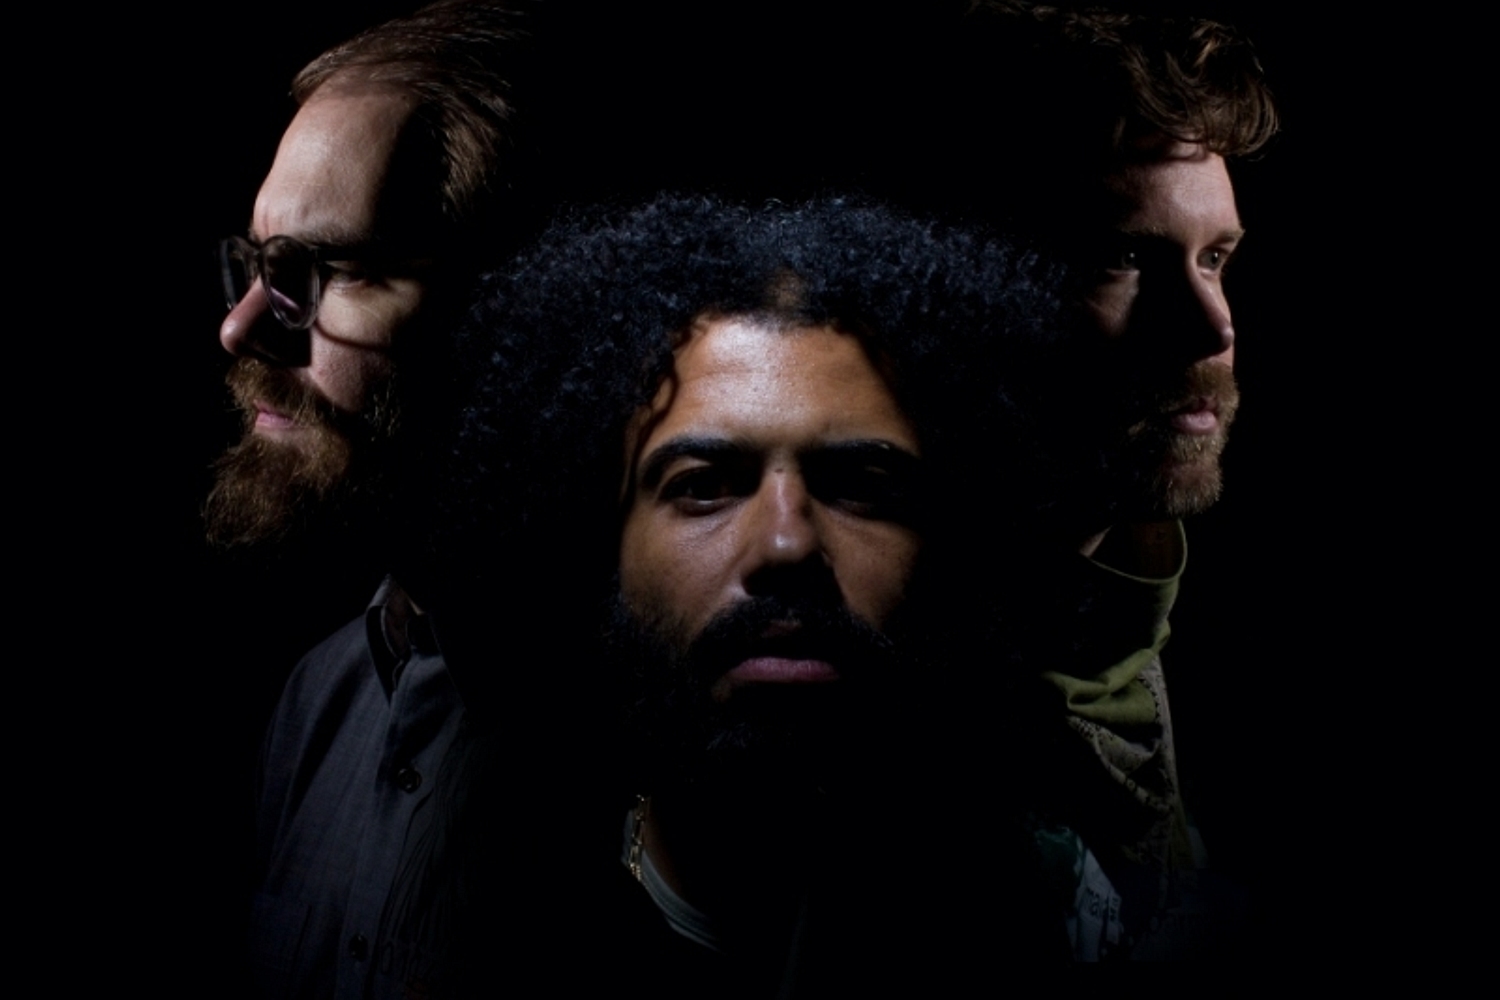 clipping. drop surprise expanded ‘Wriggle’ EP